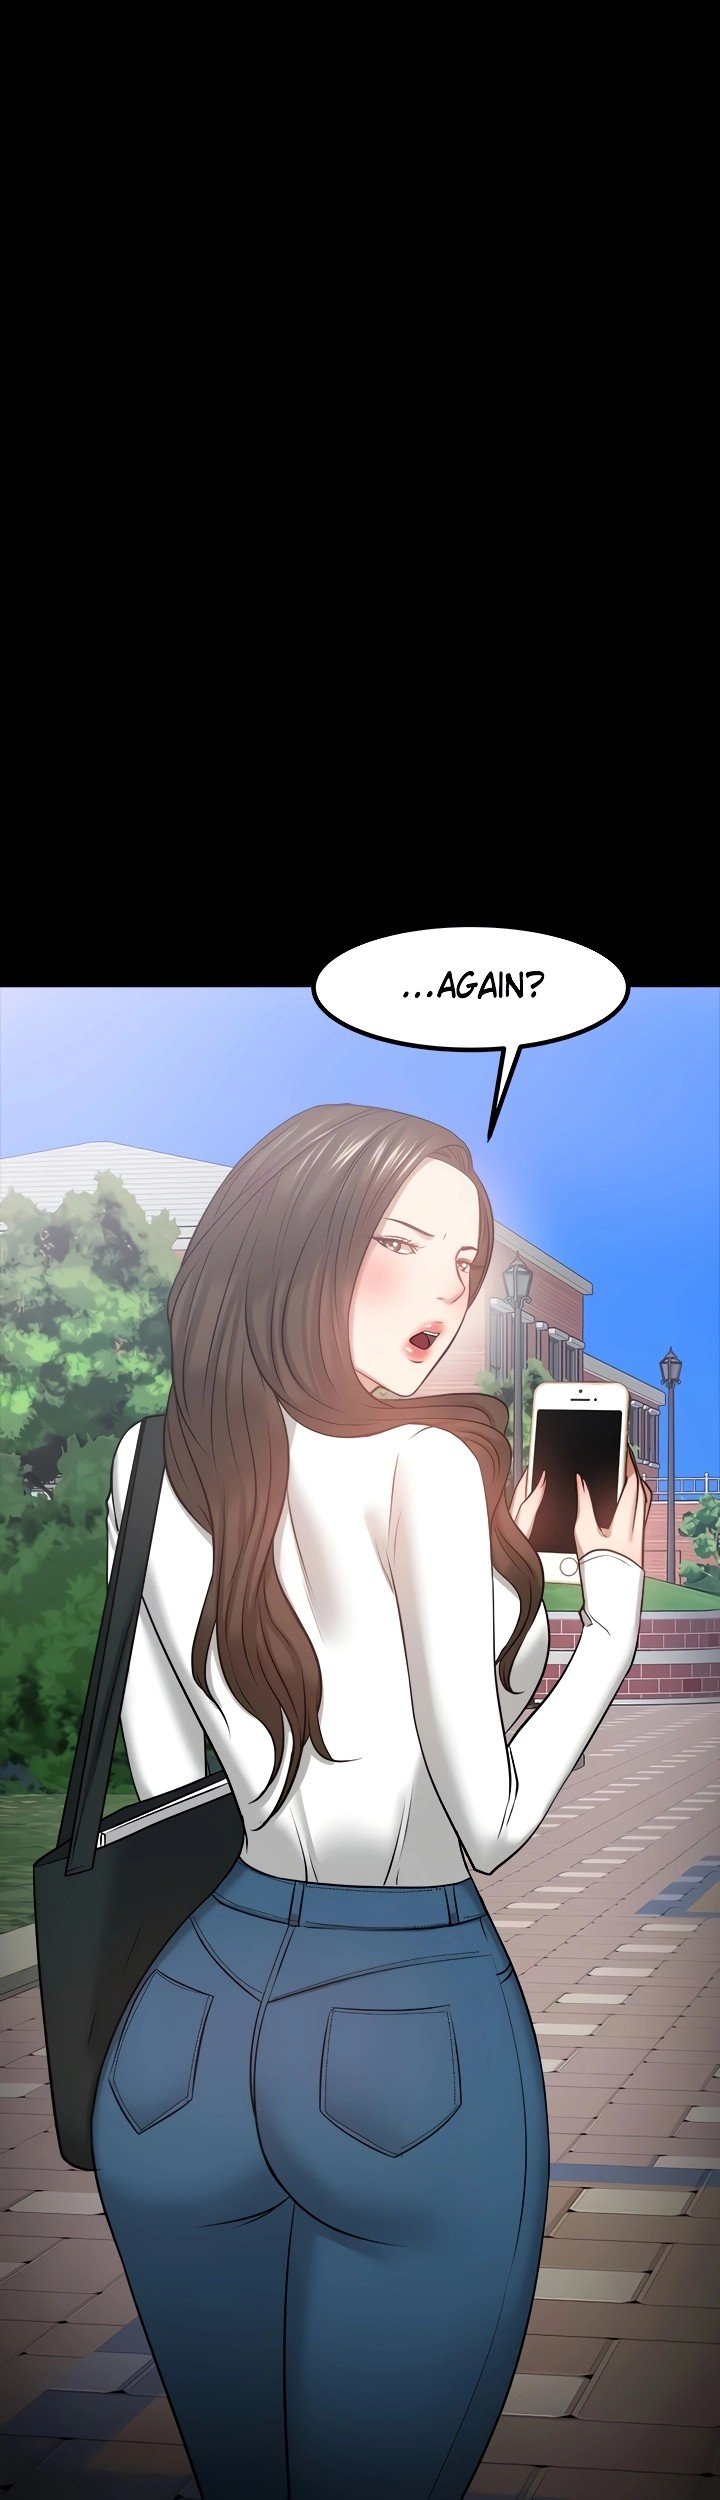 are-you-just-going-to-watch-chap-30-65